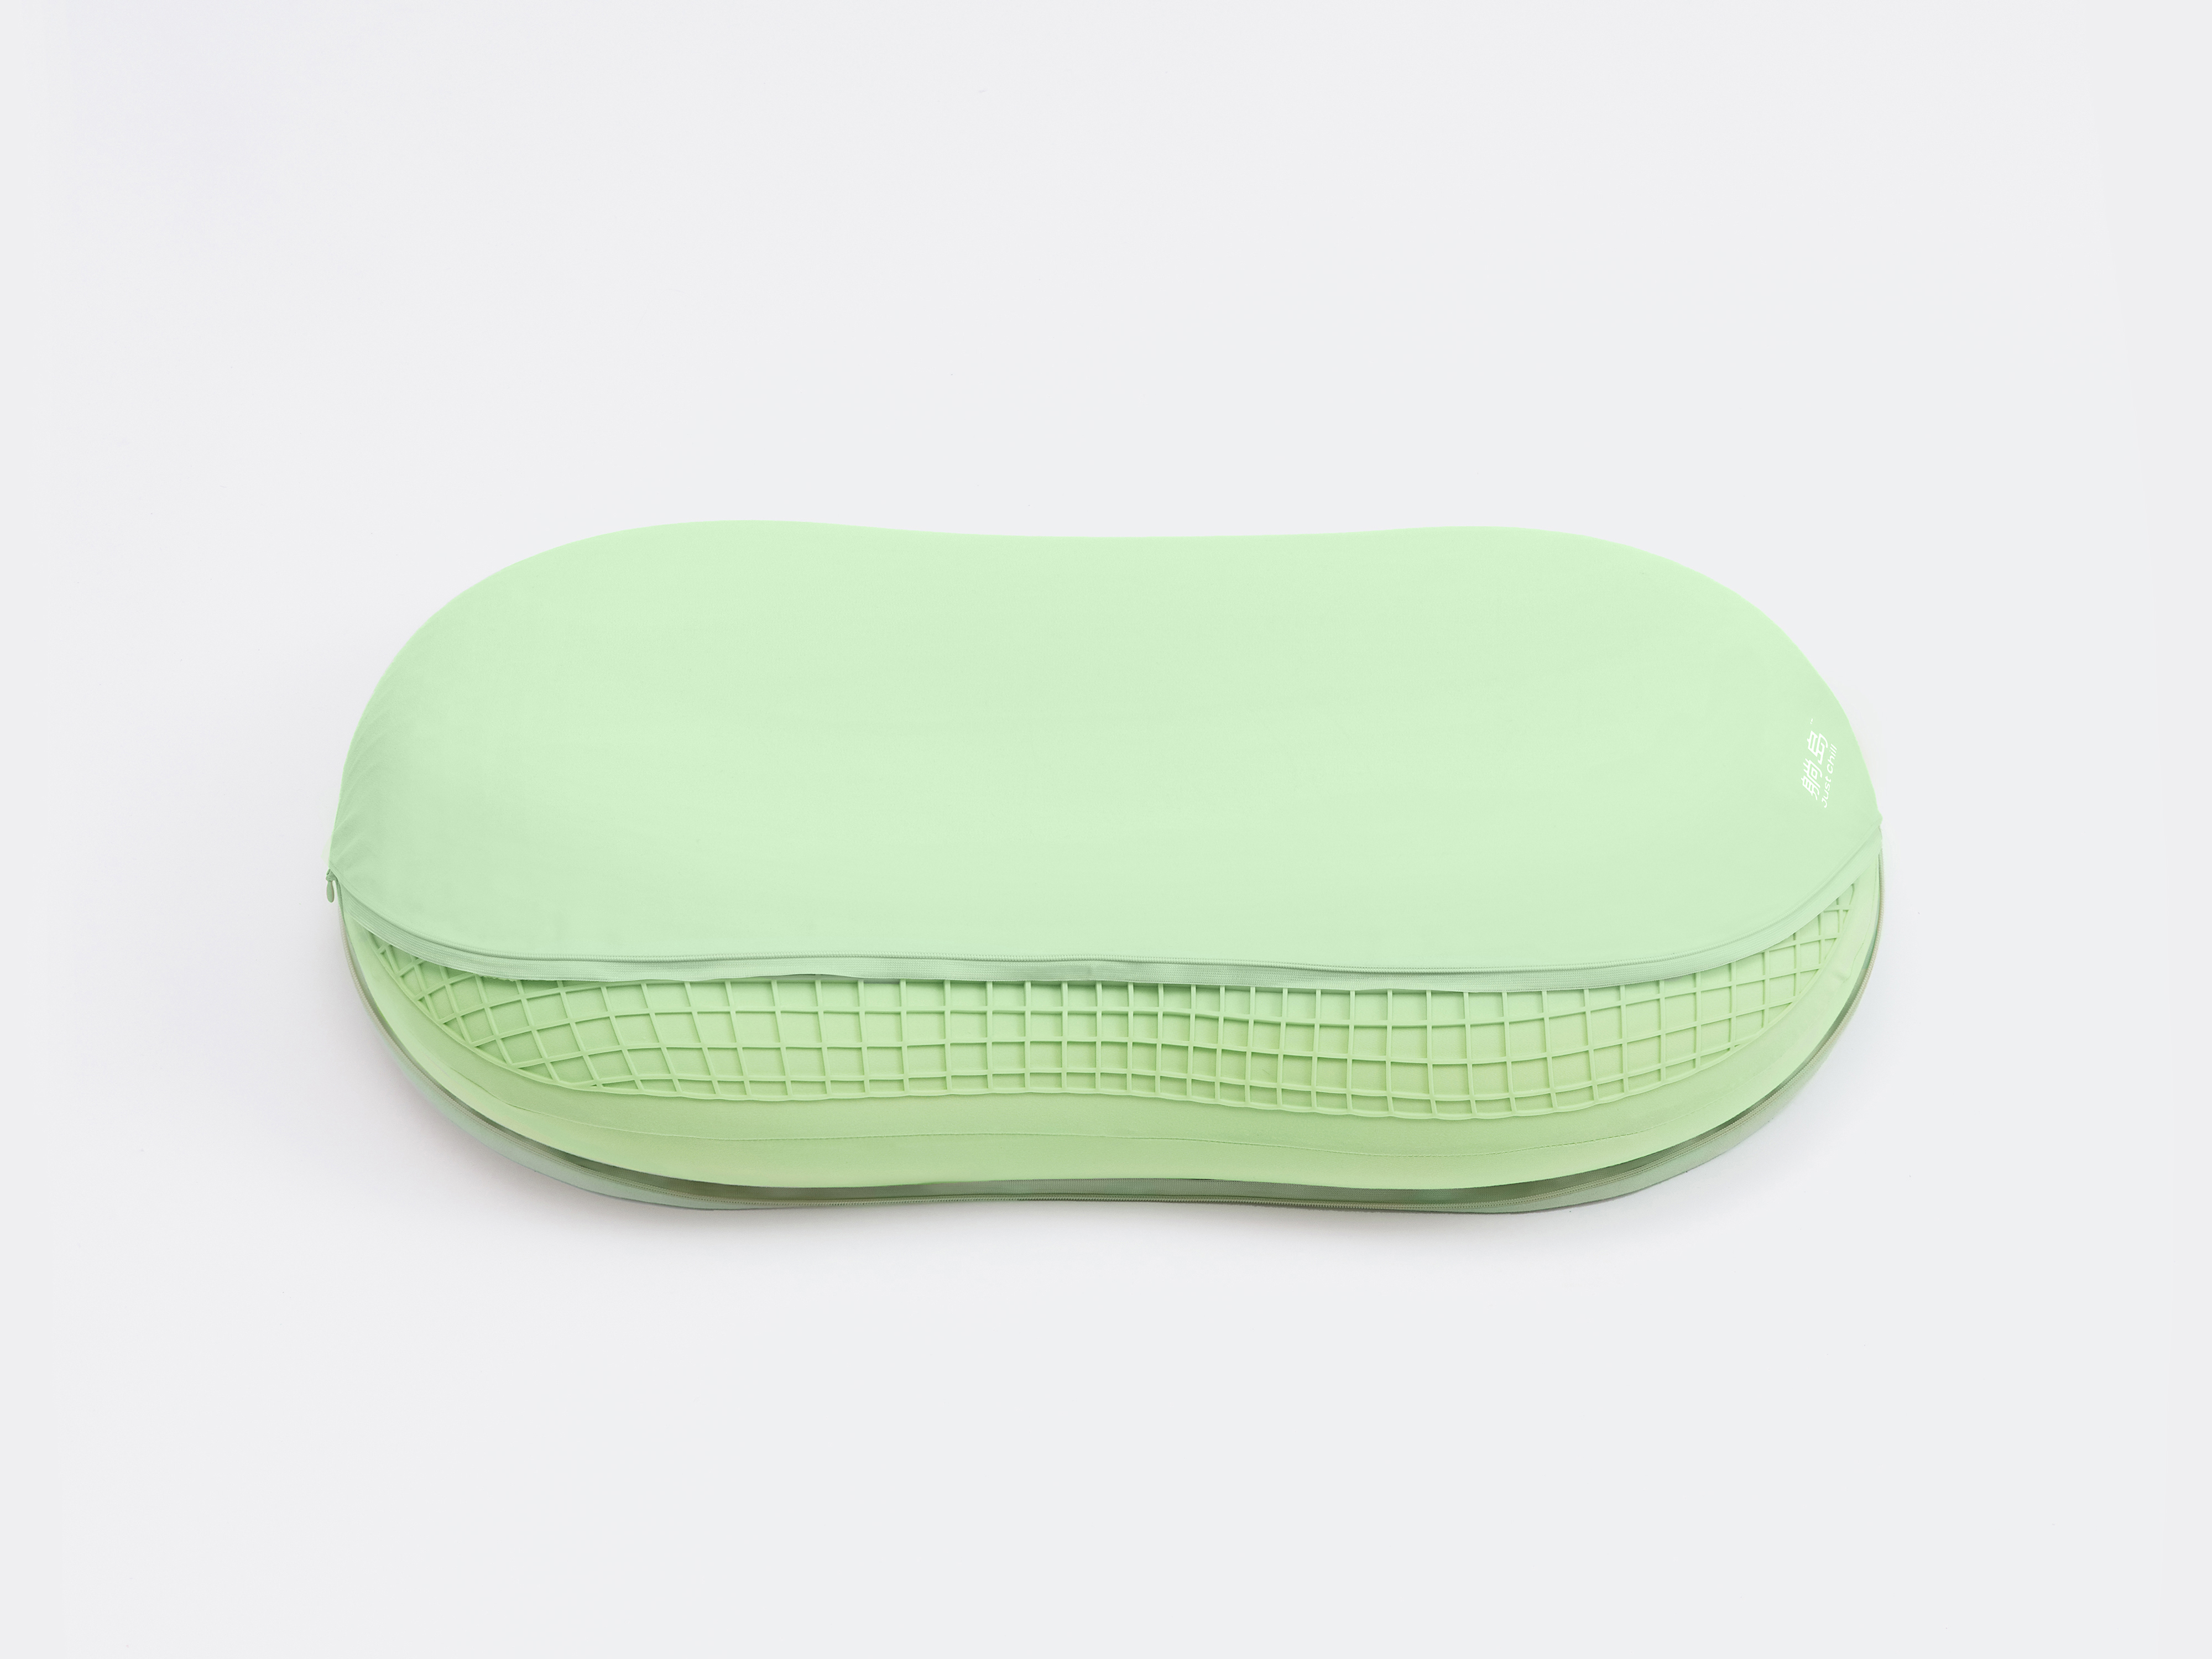 TANGDAO- Cat Belly Pillow with Chillbreeze tech